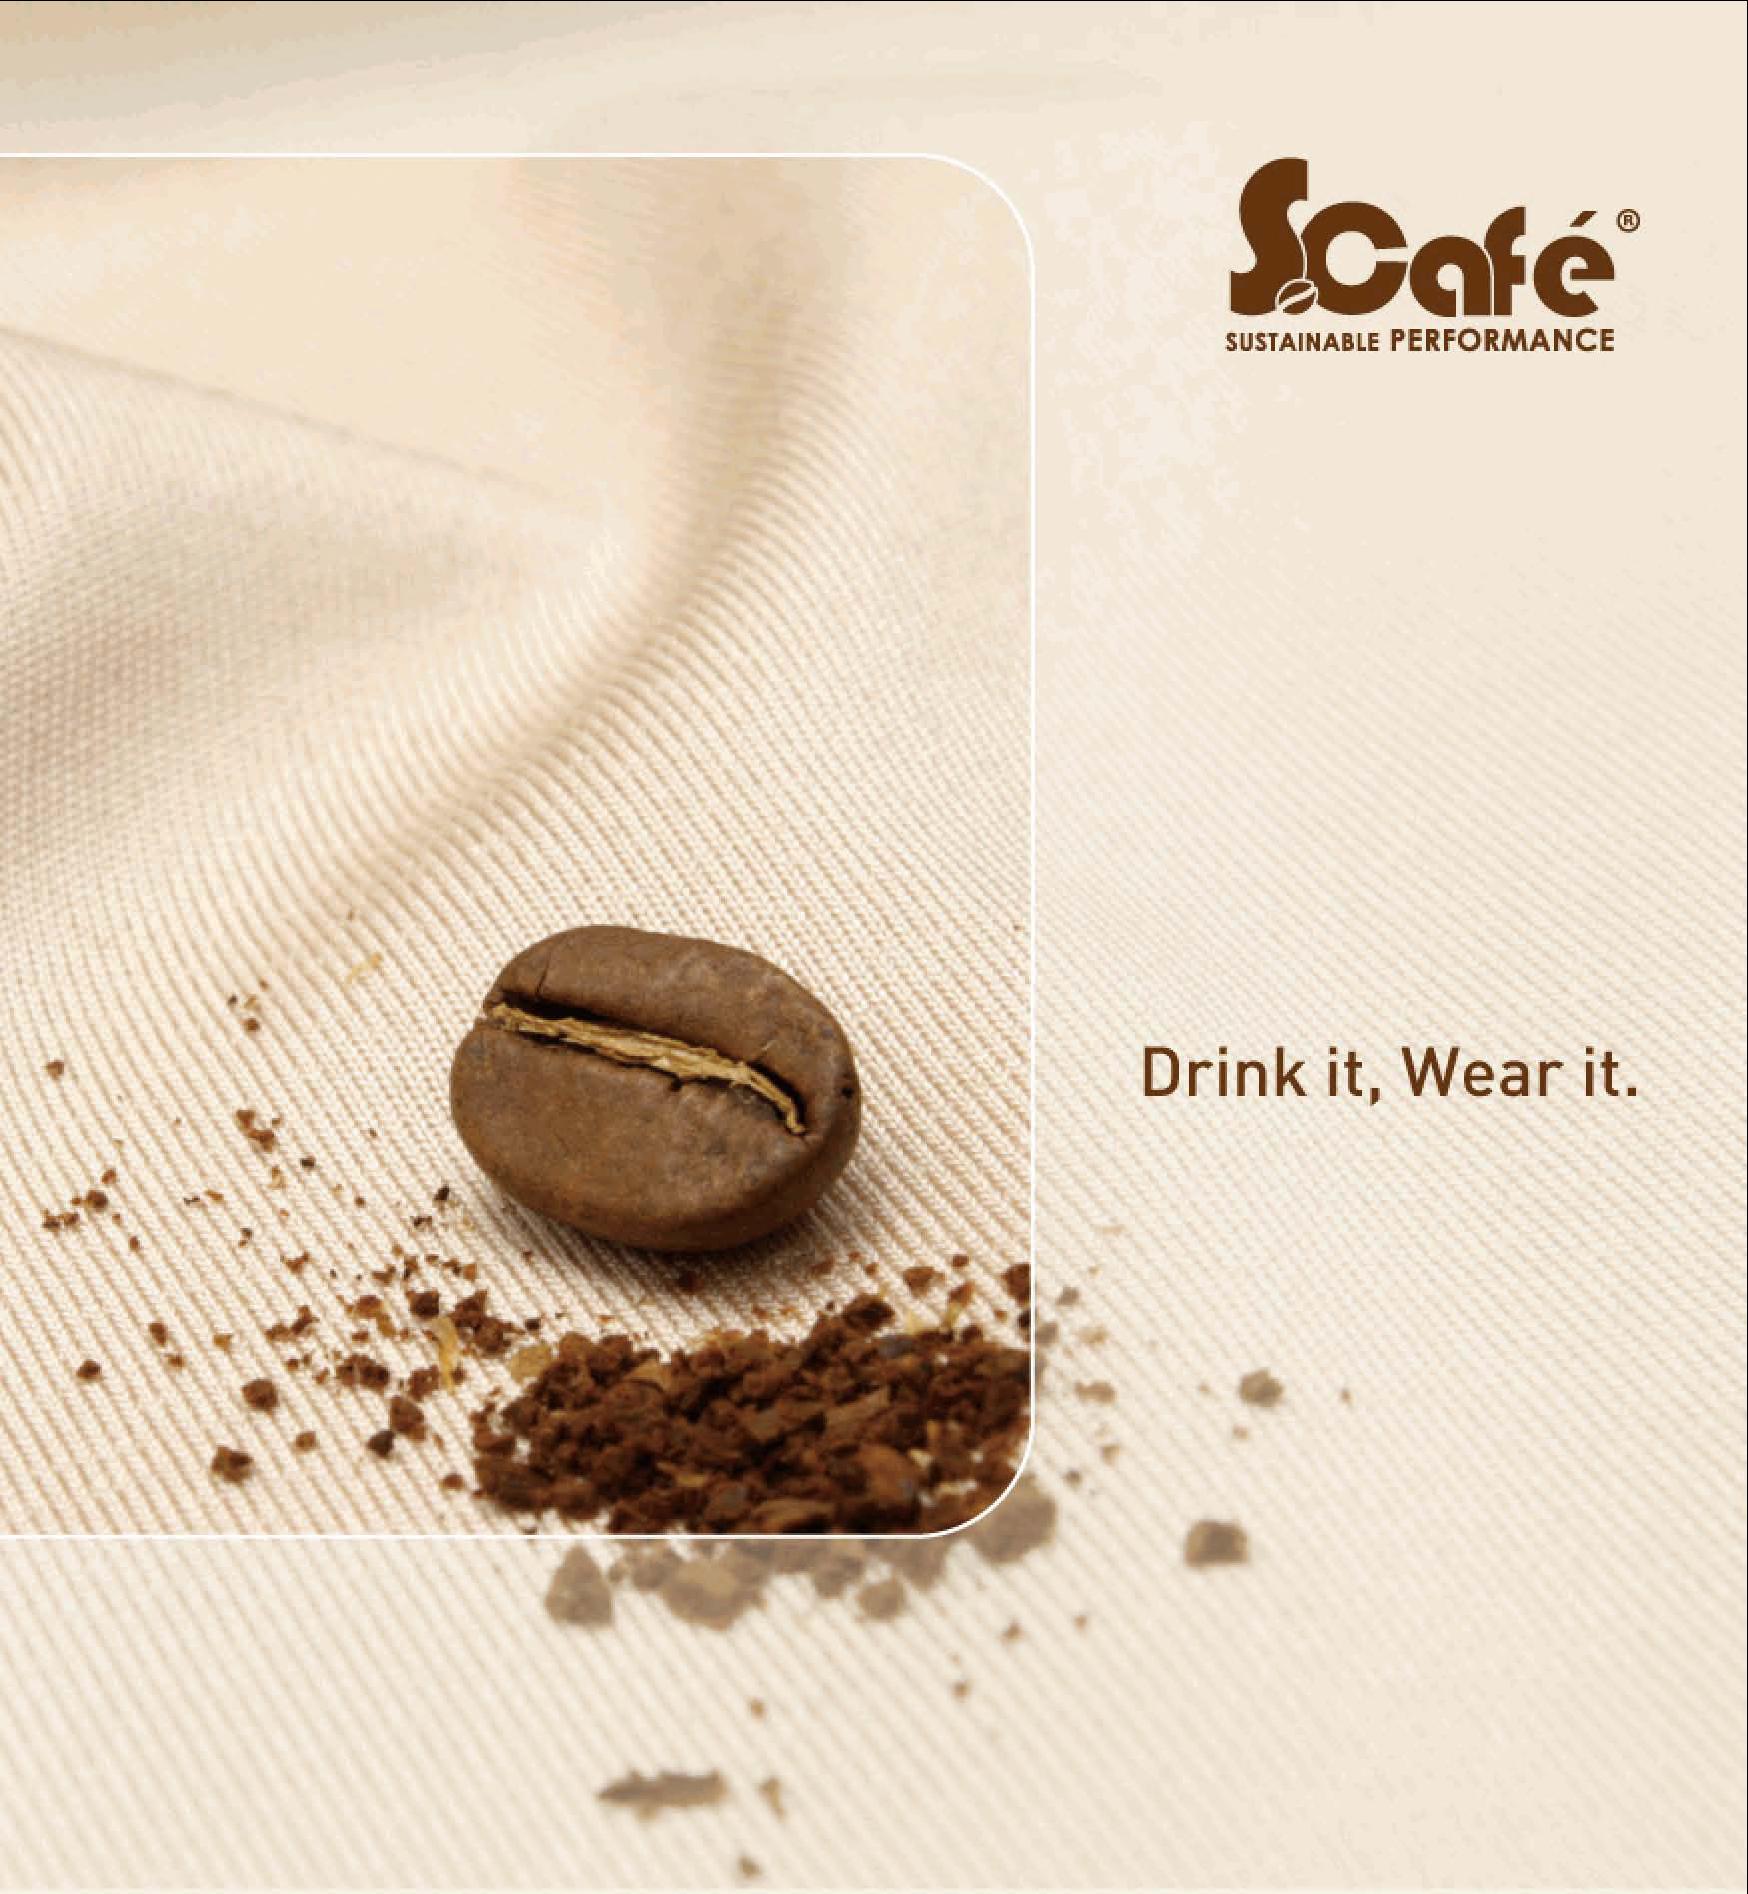 Café: The fabric from coffee grounds breaking new ground